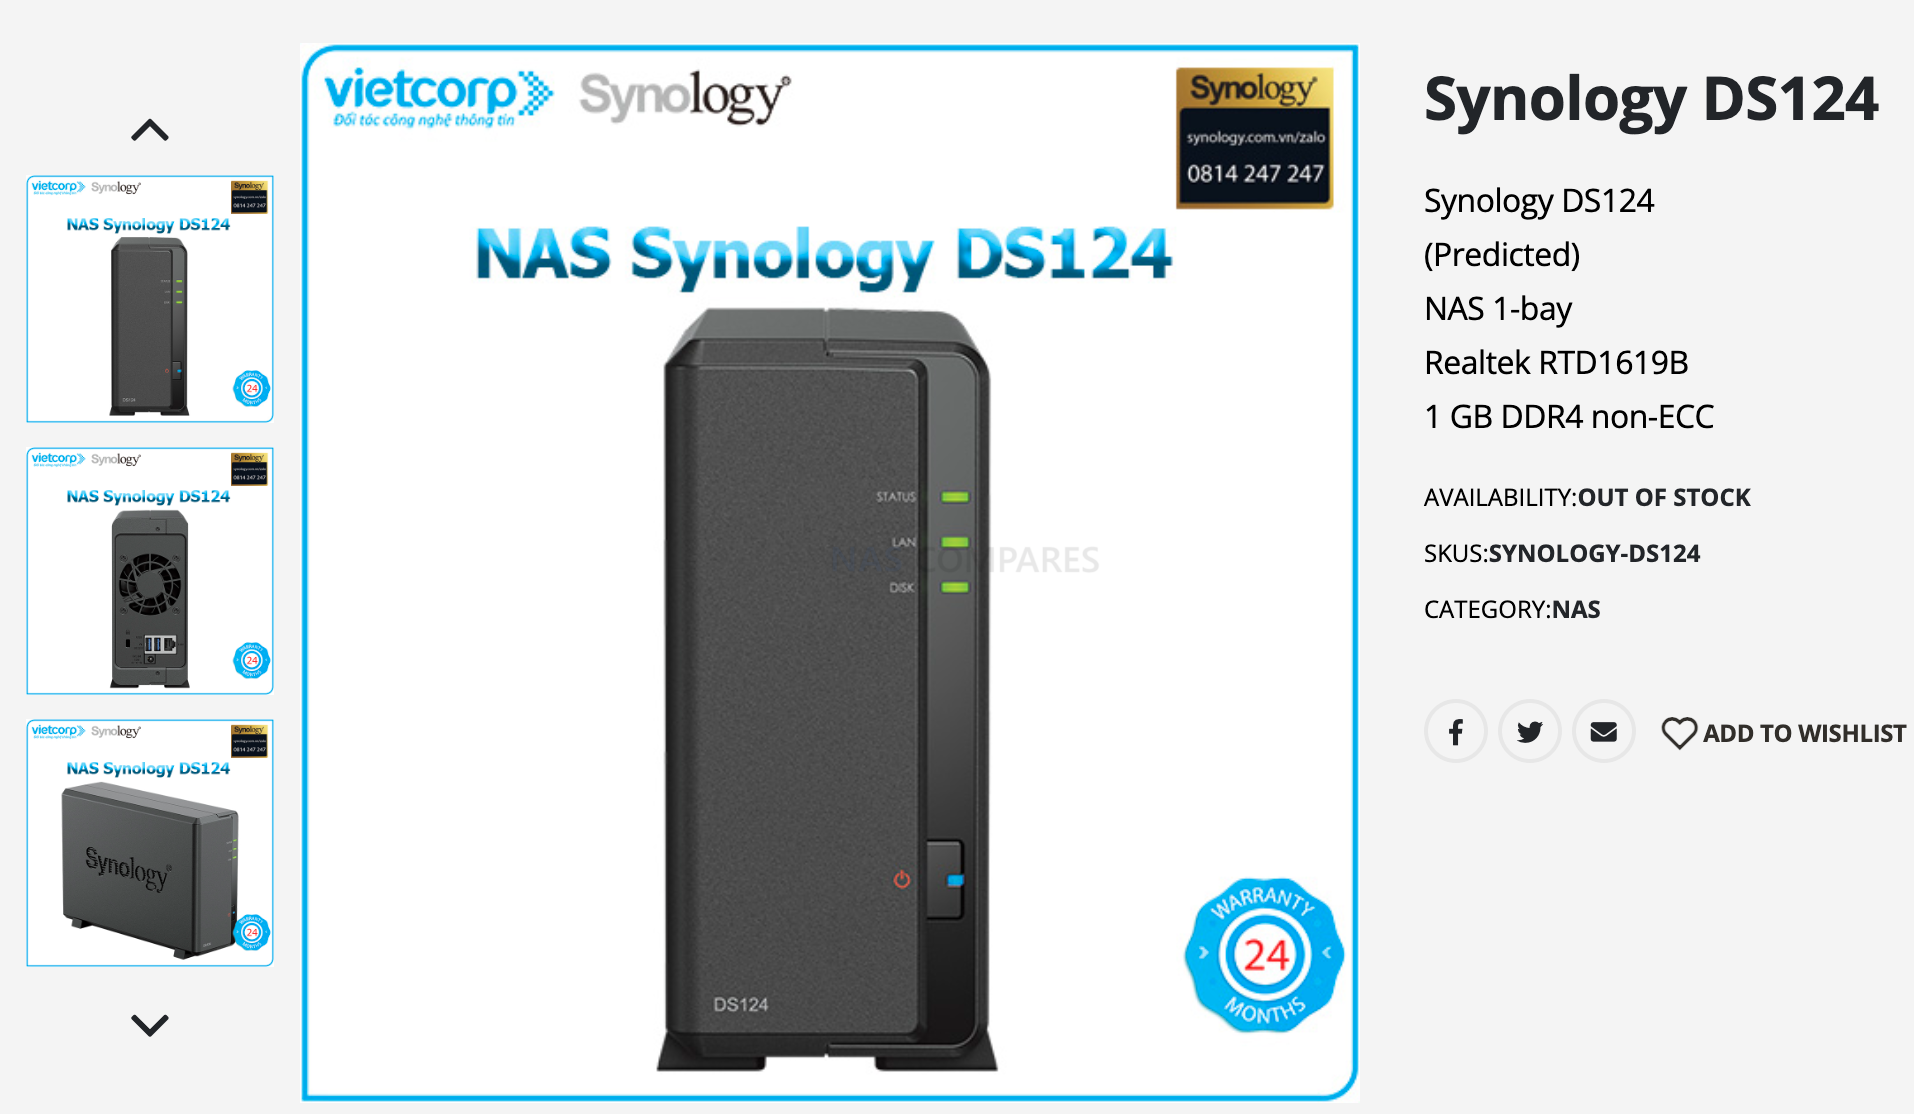 Synology DiskStation DS124 - 1 Baie - Serveur NAS Synology